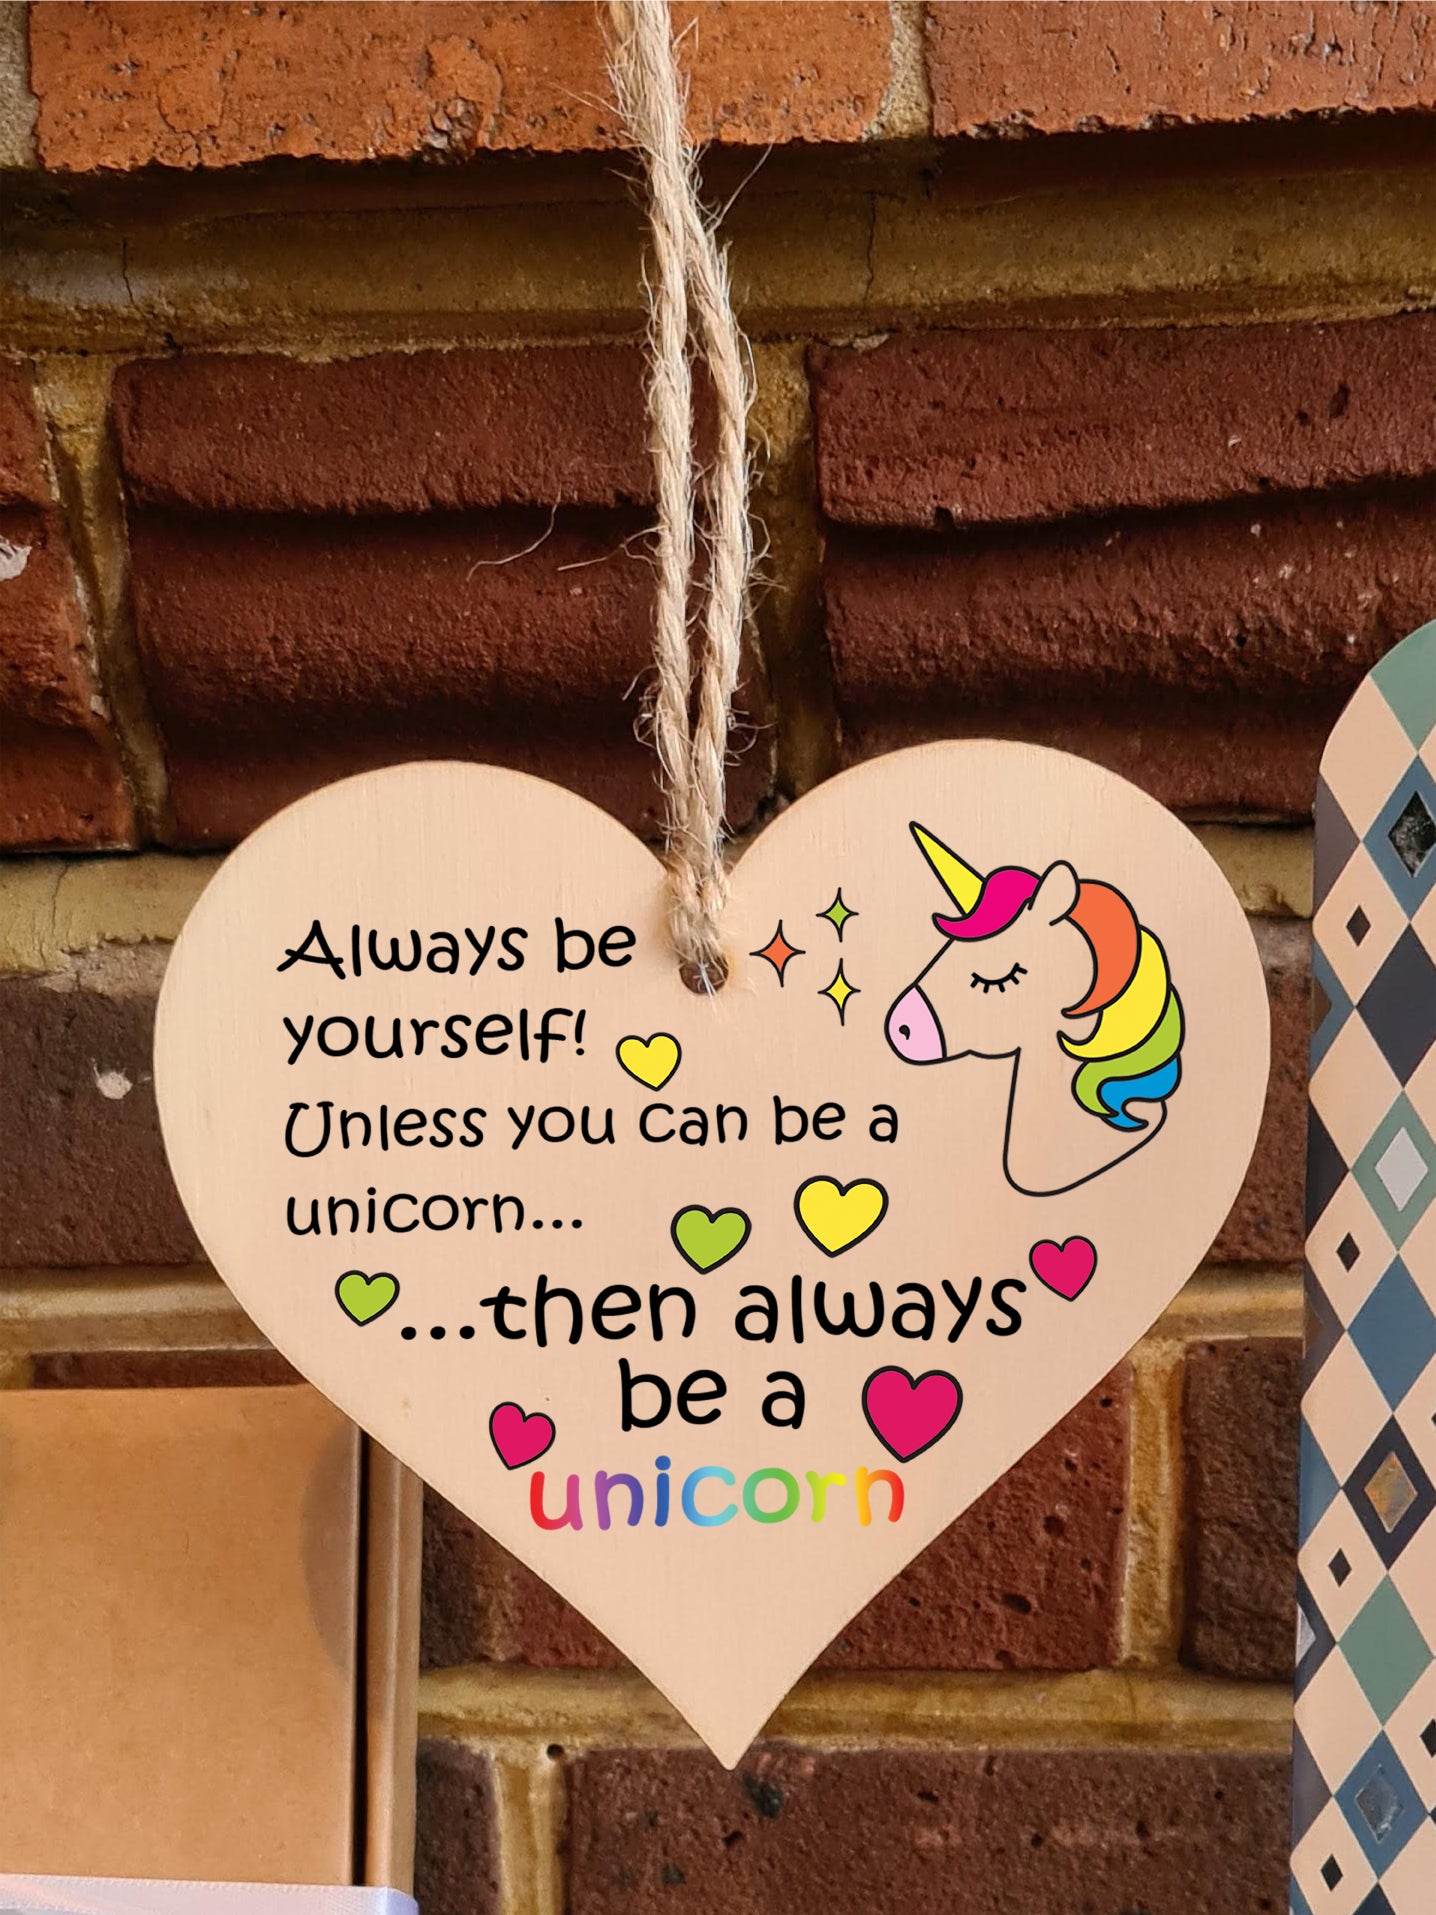 Handmade Wooden Hanging Heart Plaque Gift for Someone Special Funny Inspirational Be a Unicorn Motivational Treat